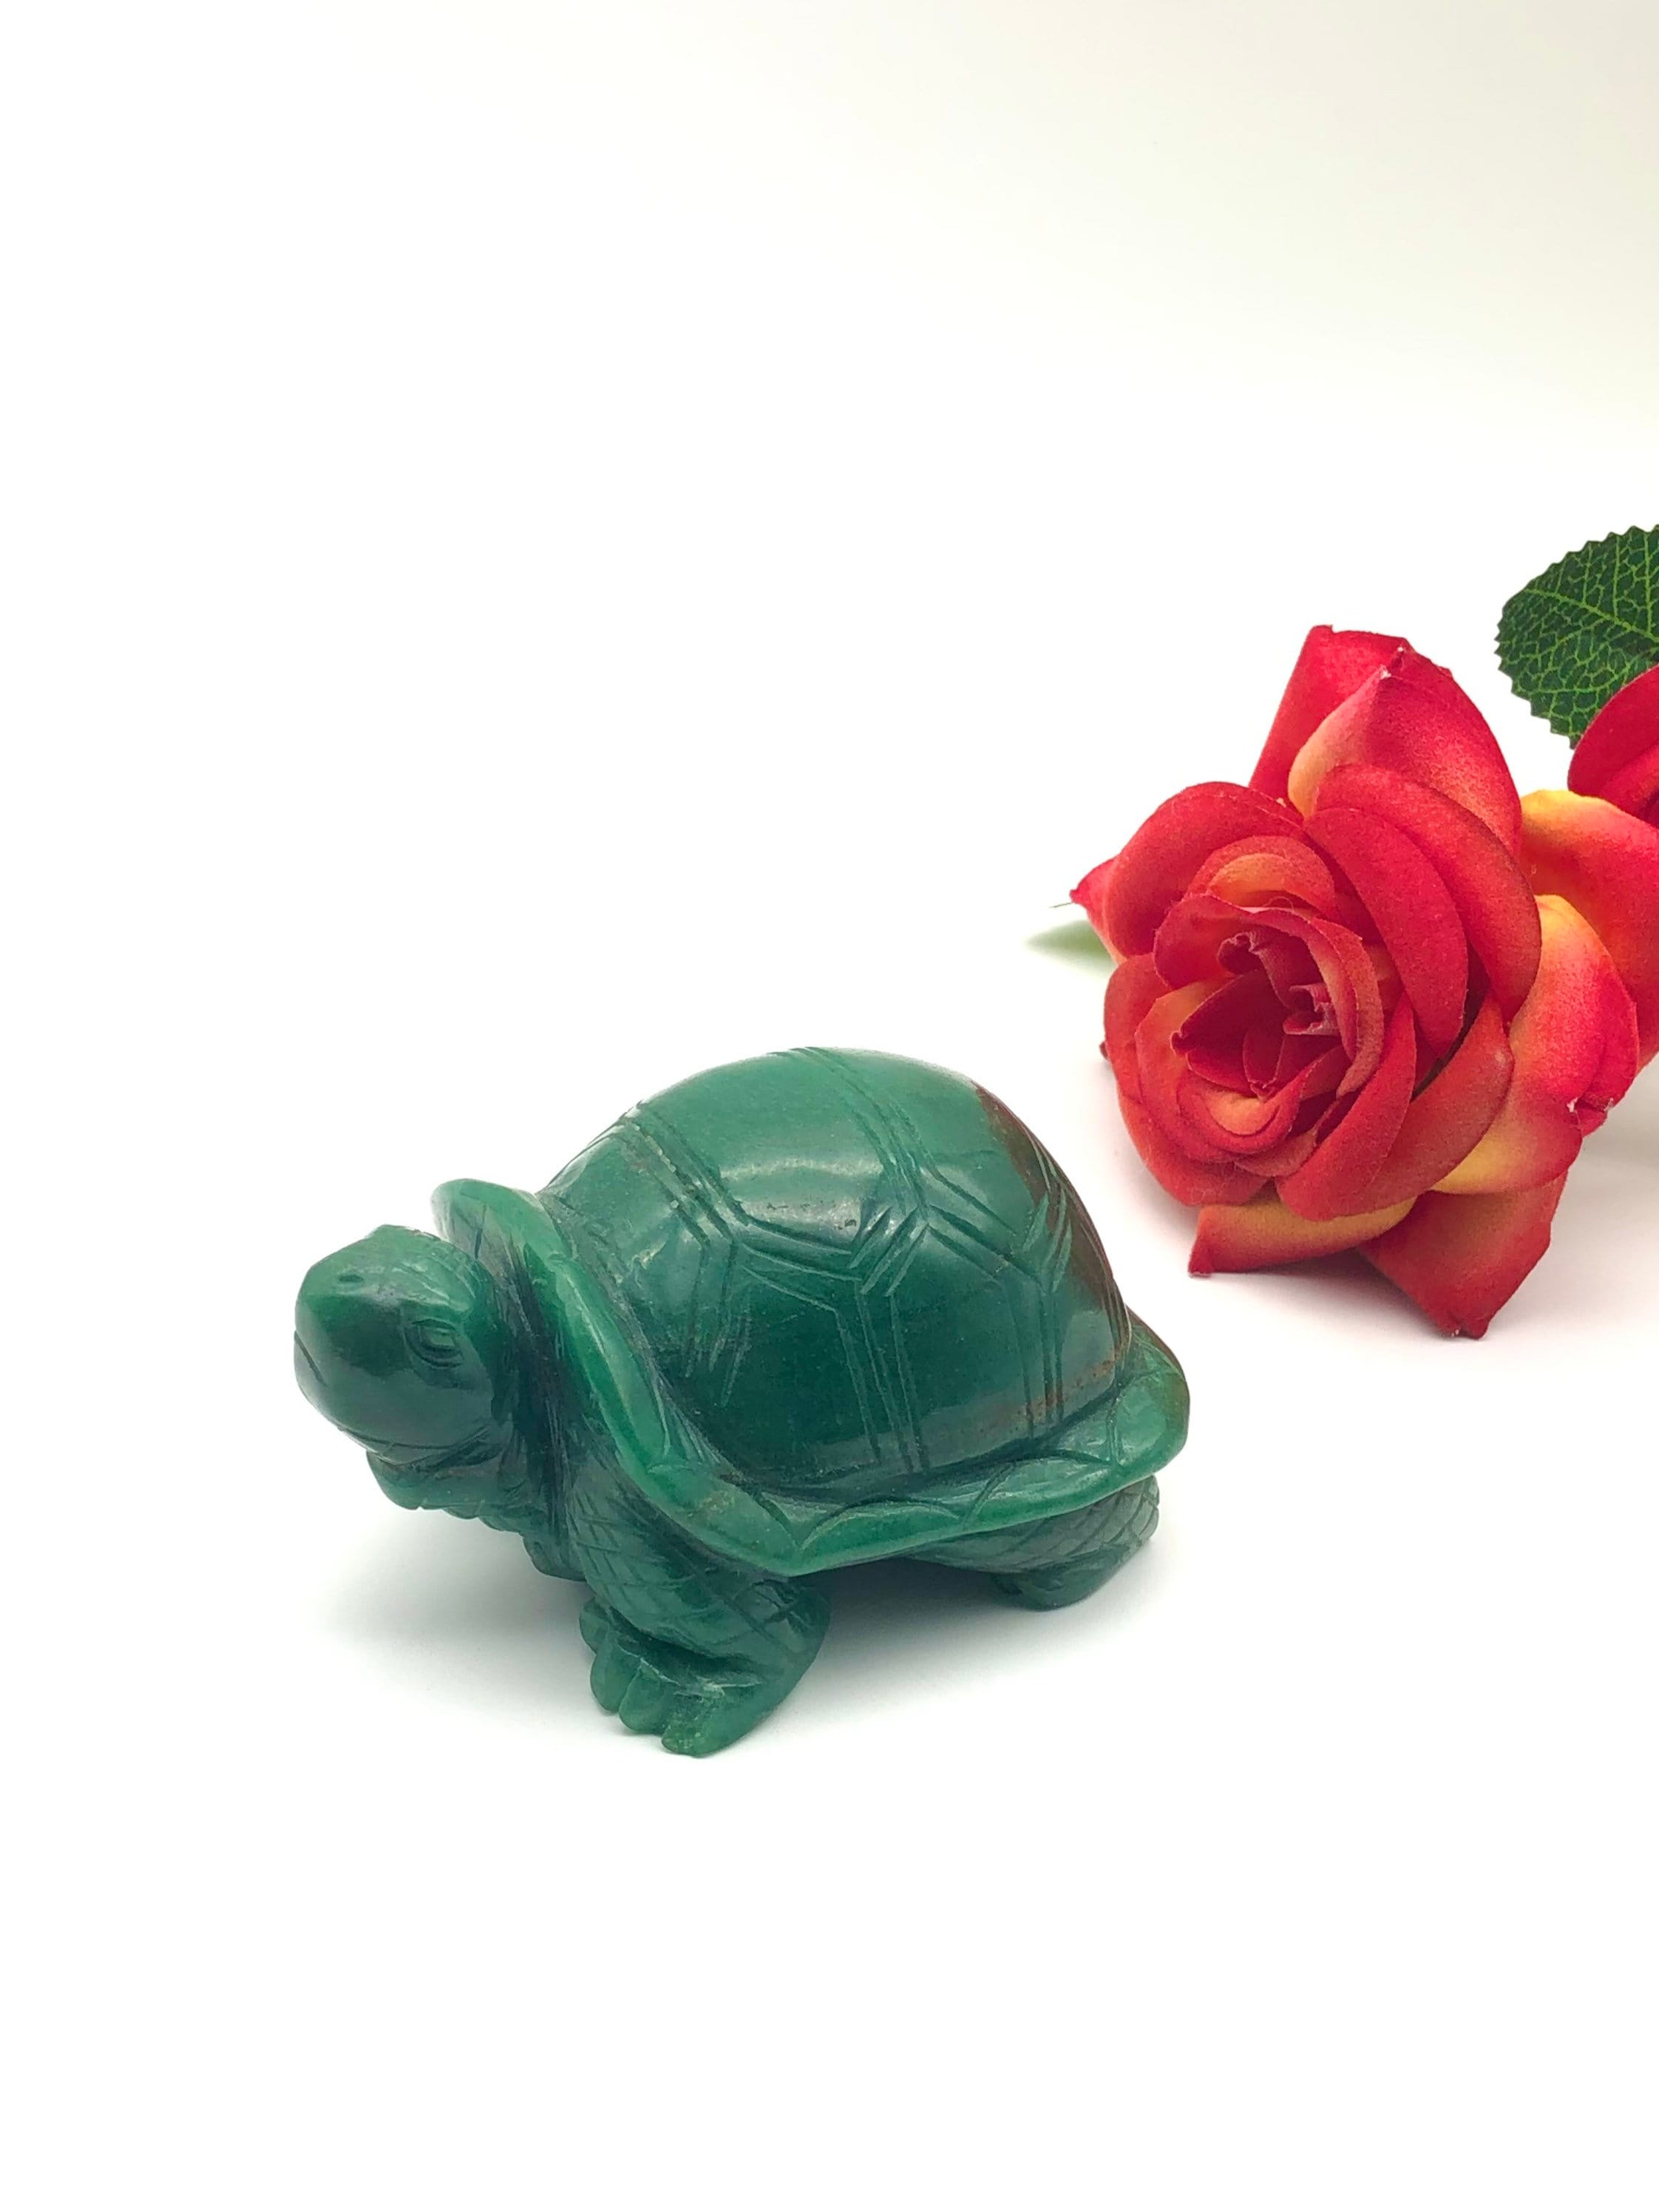 100% Genuine Green Aventurine HandMade Turtle Carving Stone Best for Home Decoration Gift And Collection. Top High Quality Carving Stone